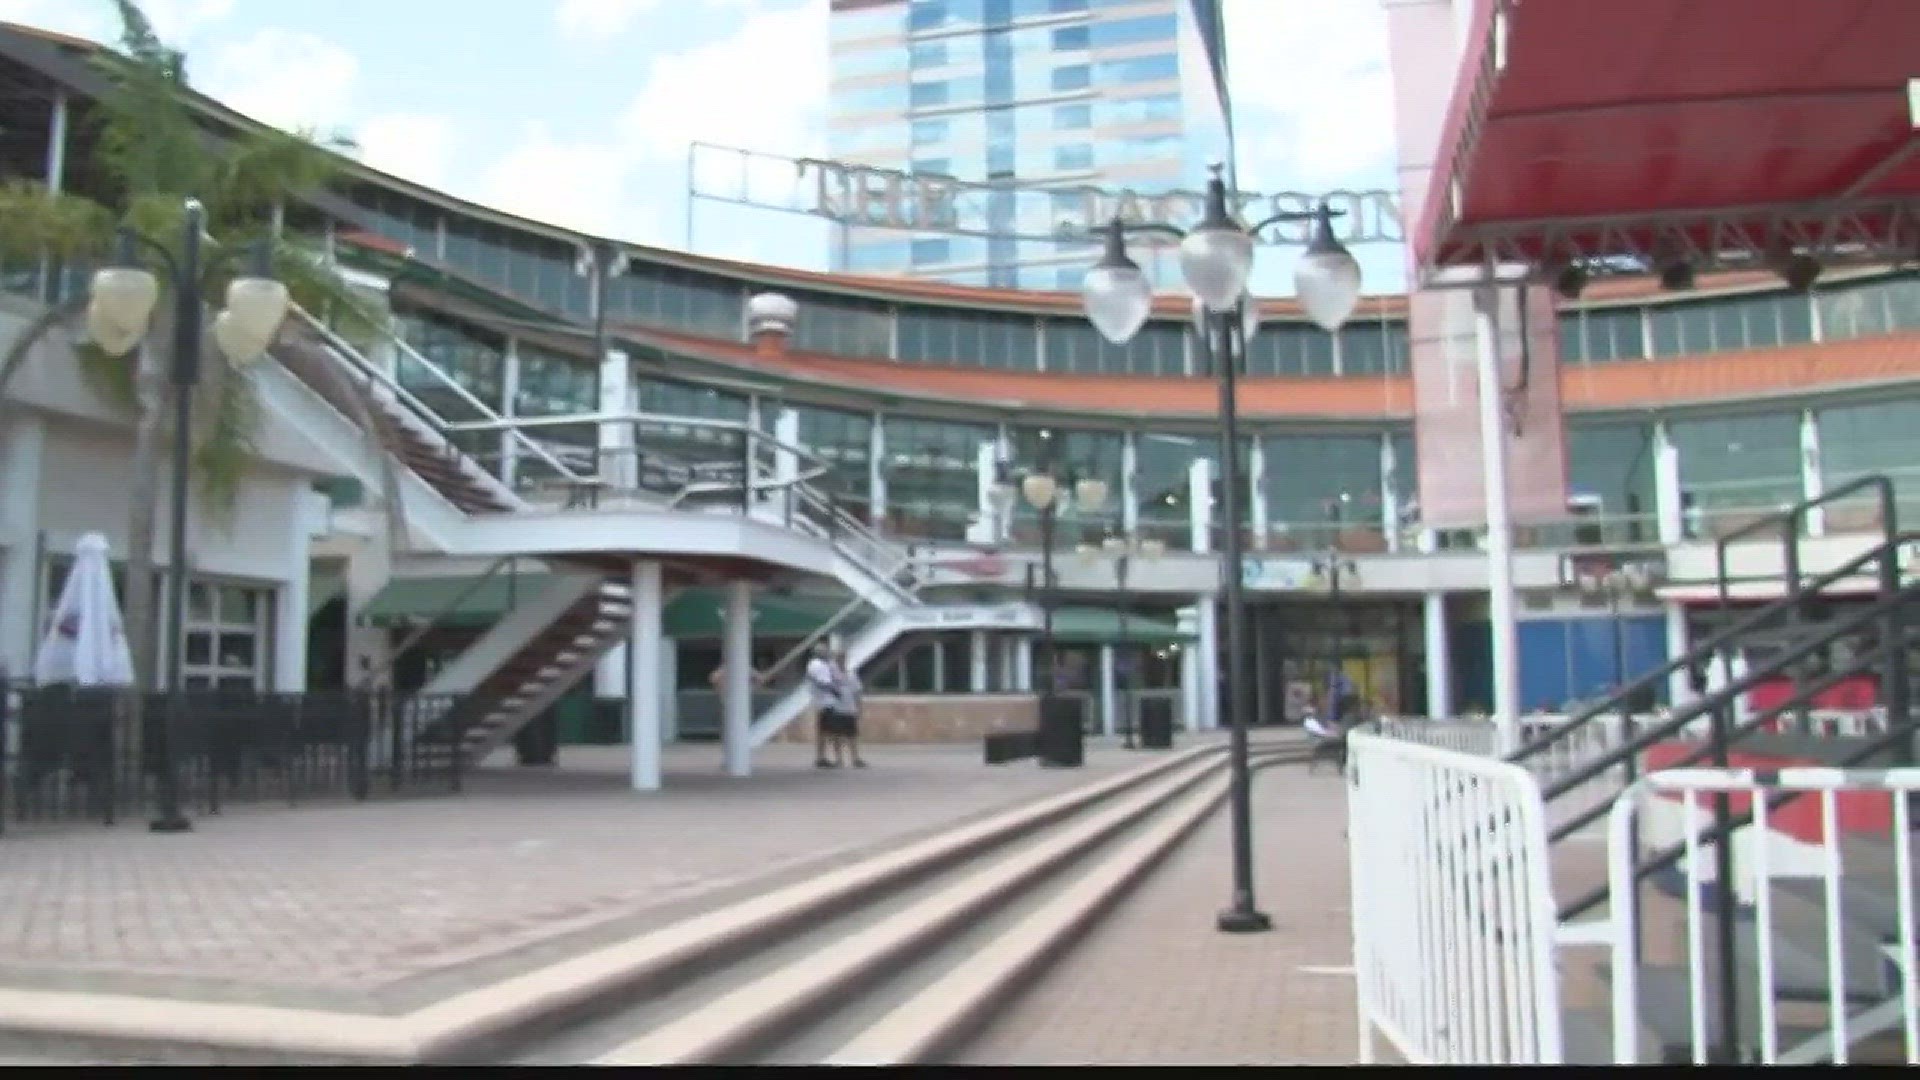 Jacksonville's Mayor wants the current owner of The Landing to give control back to the city.